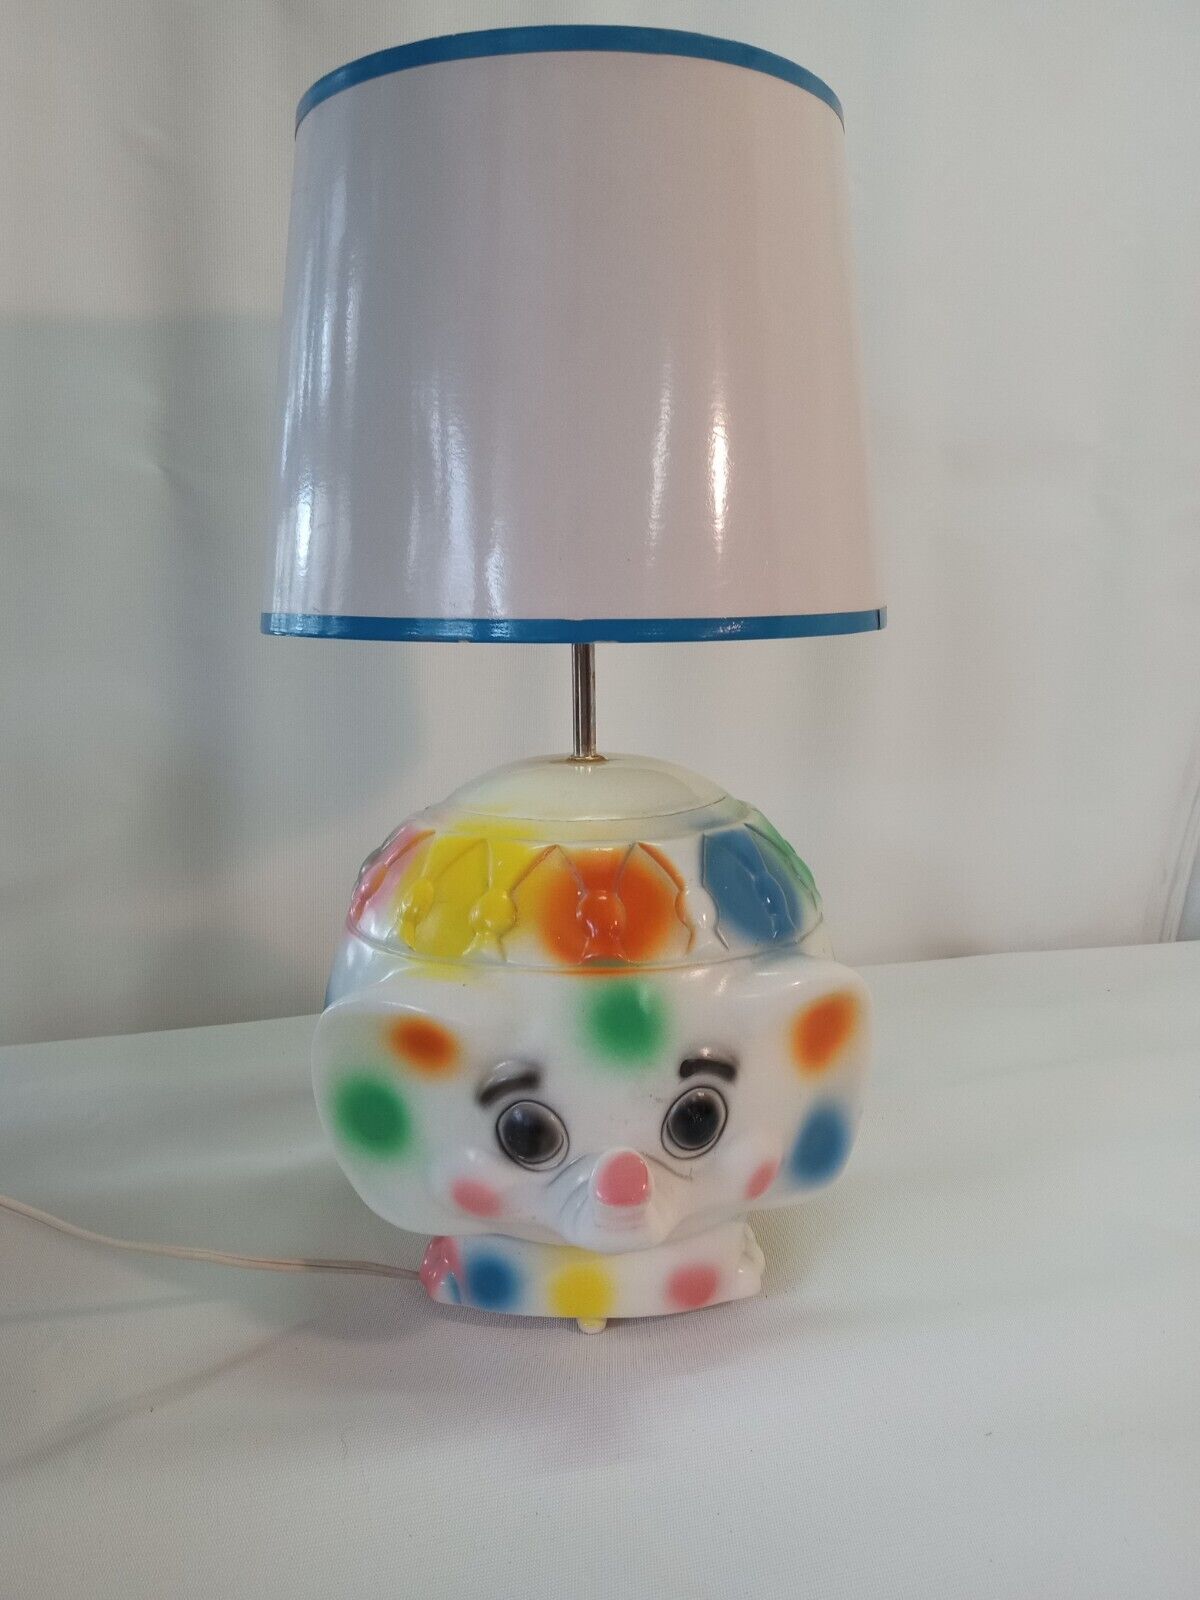 Polka Dot Elephant Lamp 1974 18” Tall With Shade. Has Glue Stains On Top